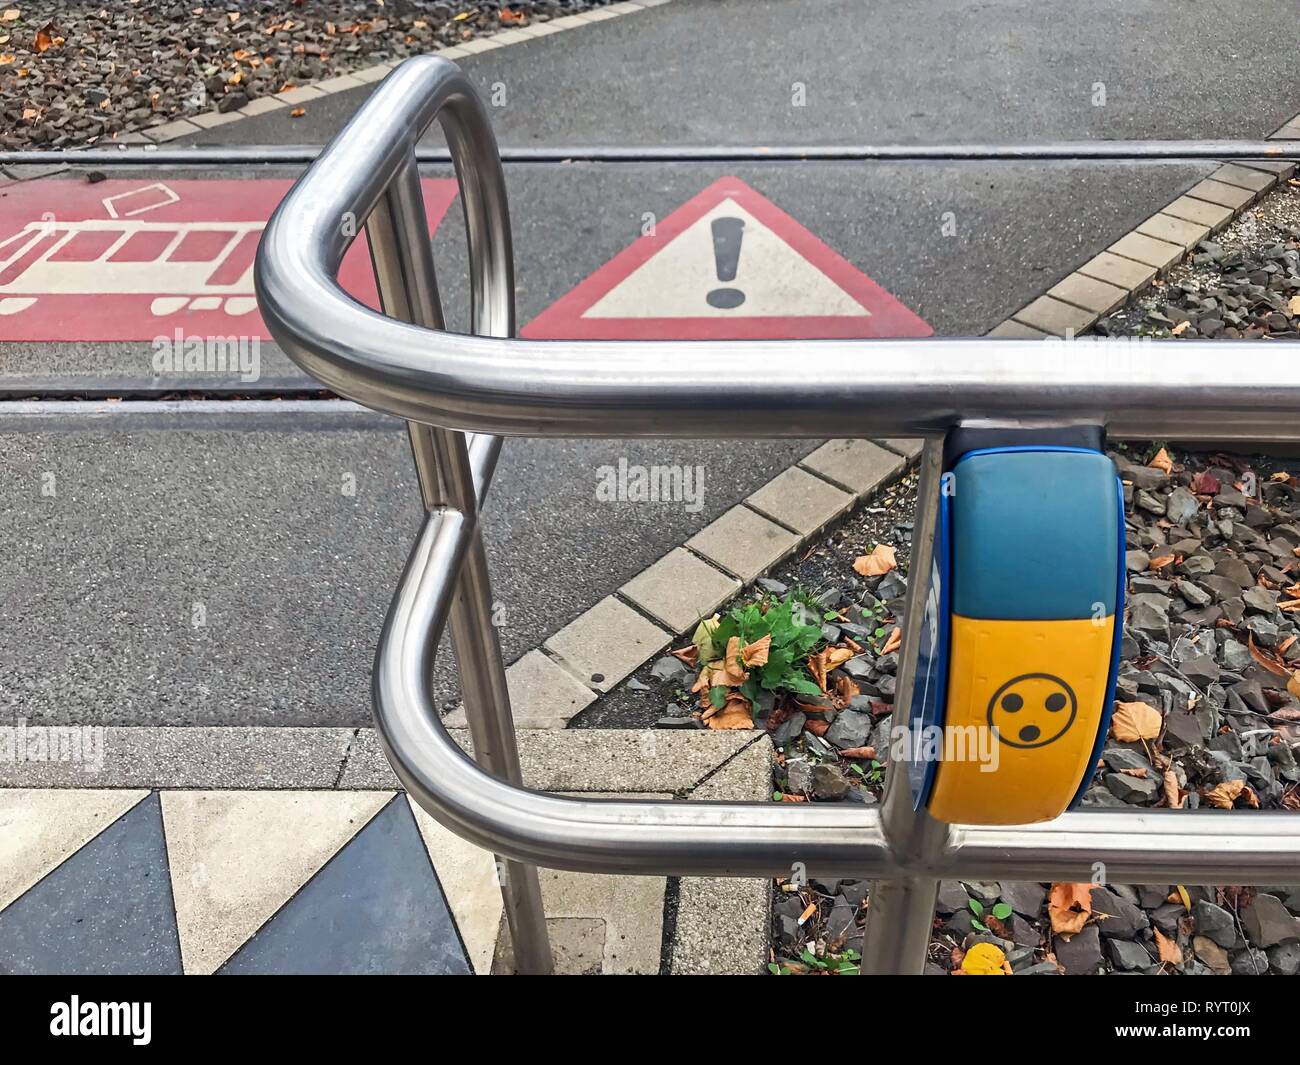 Warning signal for the visually impaired at the tram crossing, Germany Stock Photo